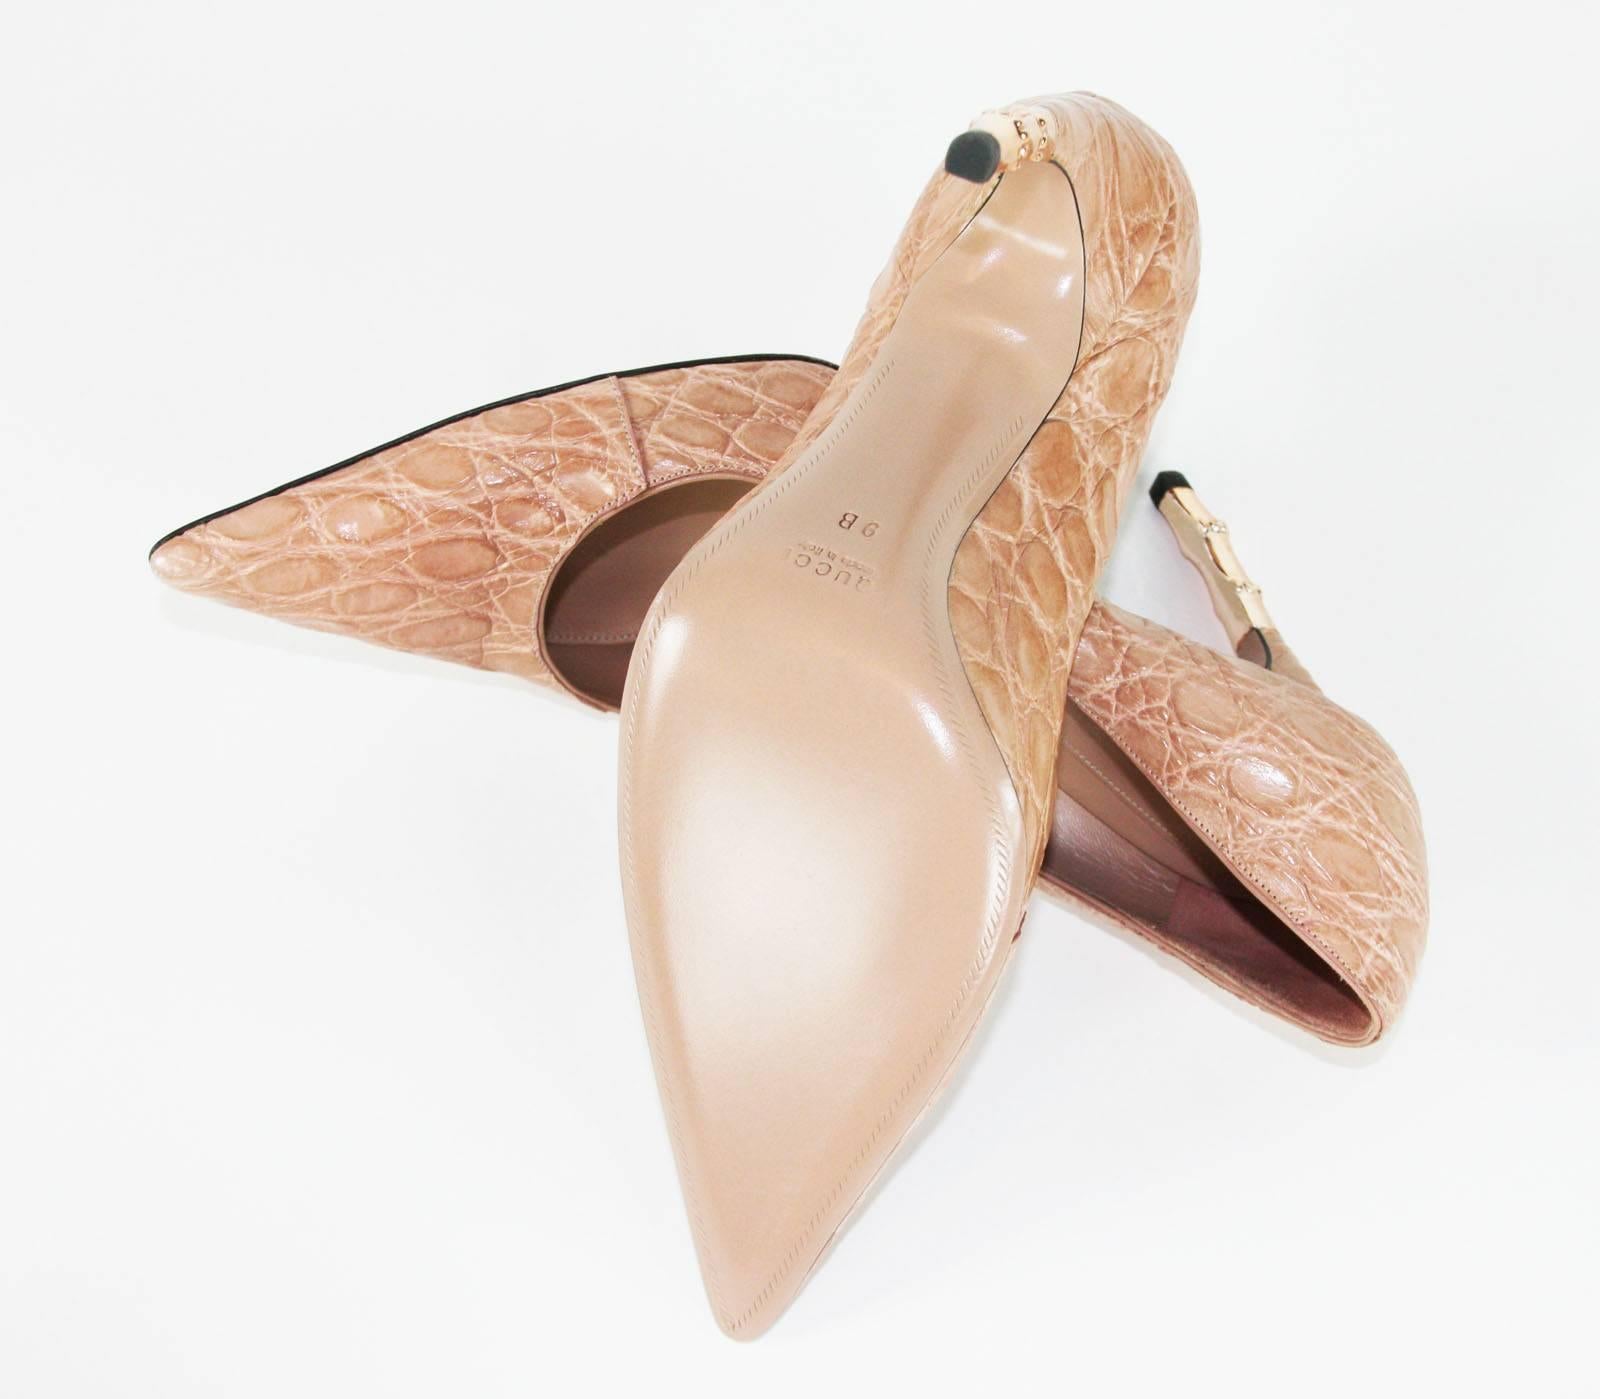 New Tom Ford for Gucci Crocodile Nude Bamboo Heel Shoes 2004 Collection 39 - 9 B In New Condition For Sale In Montgomery, TX